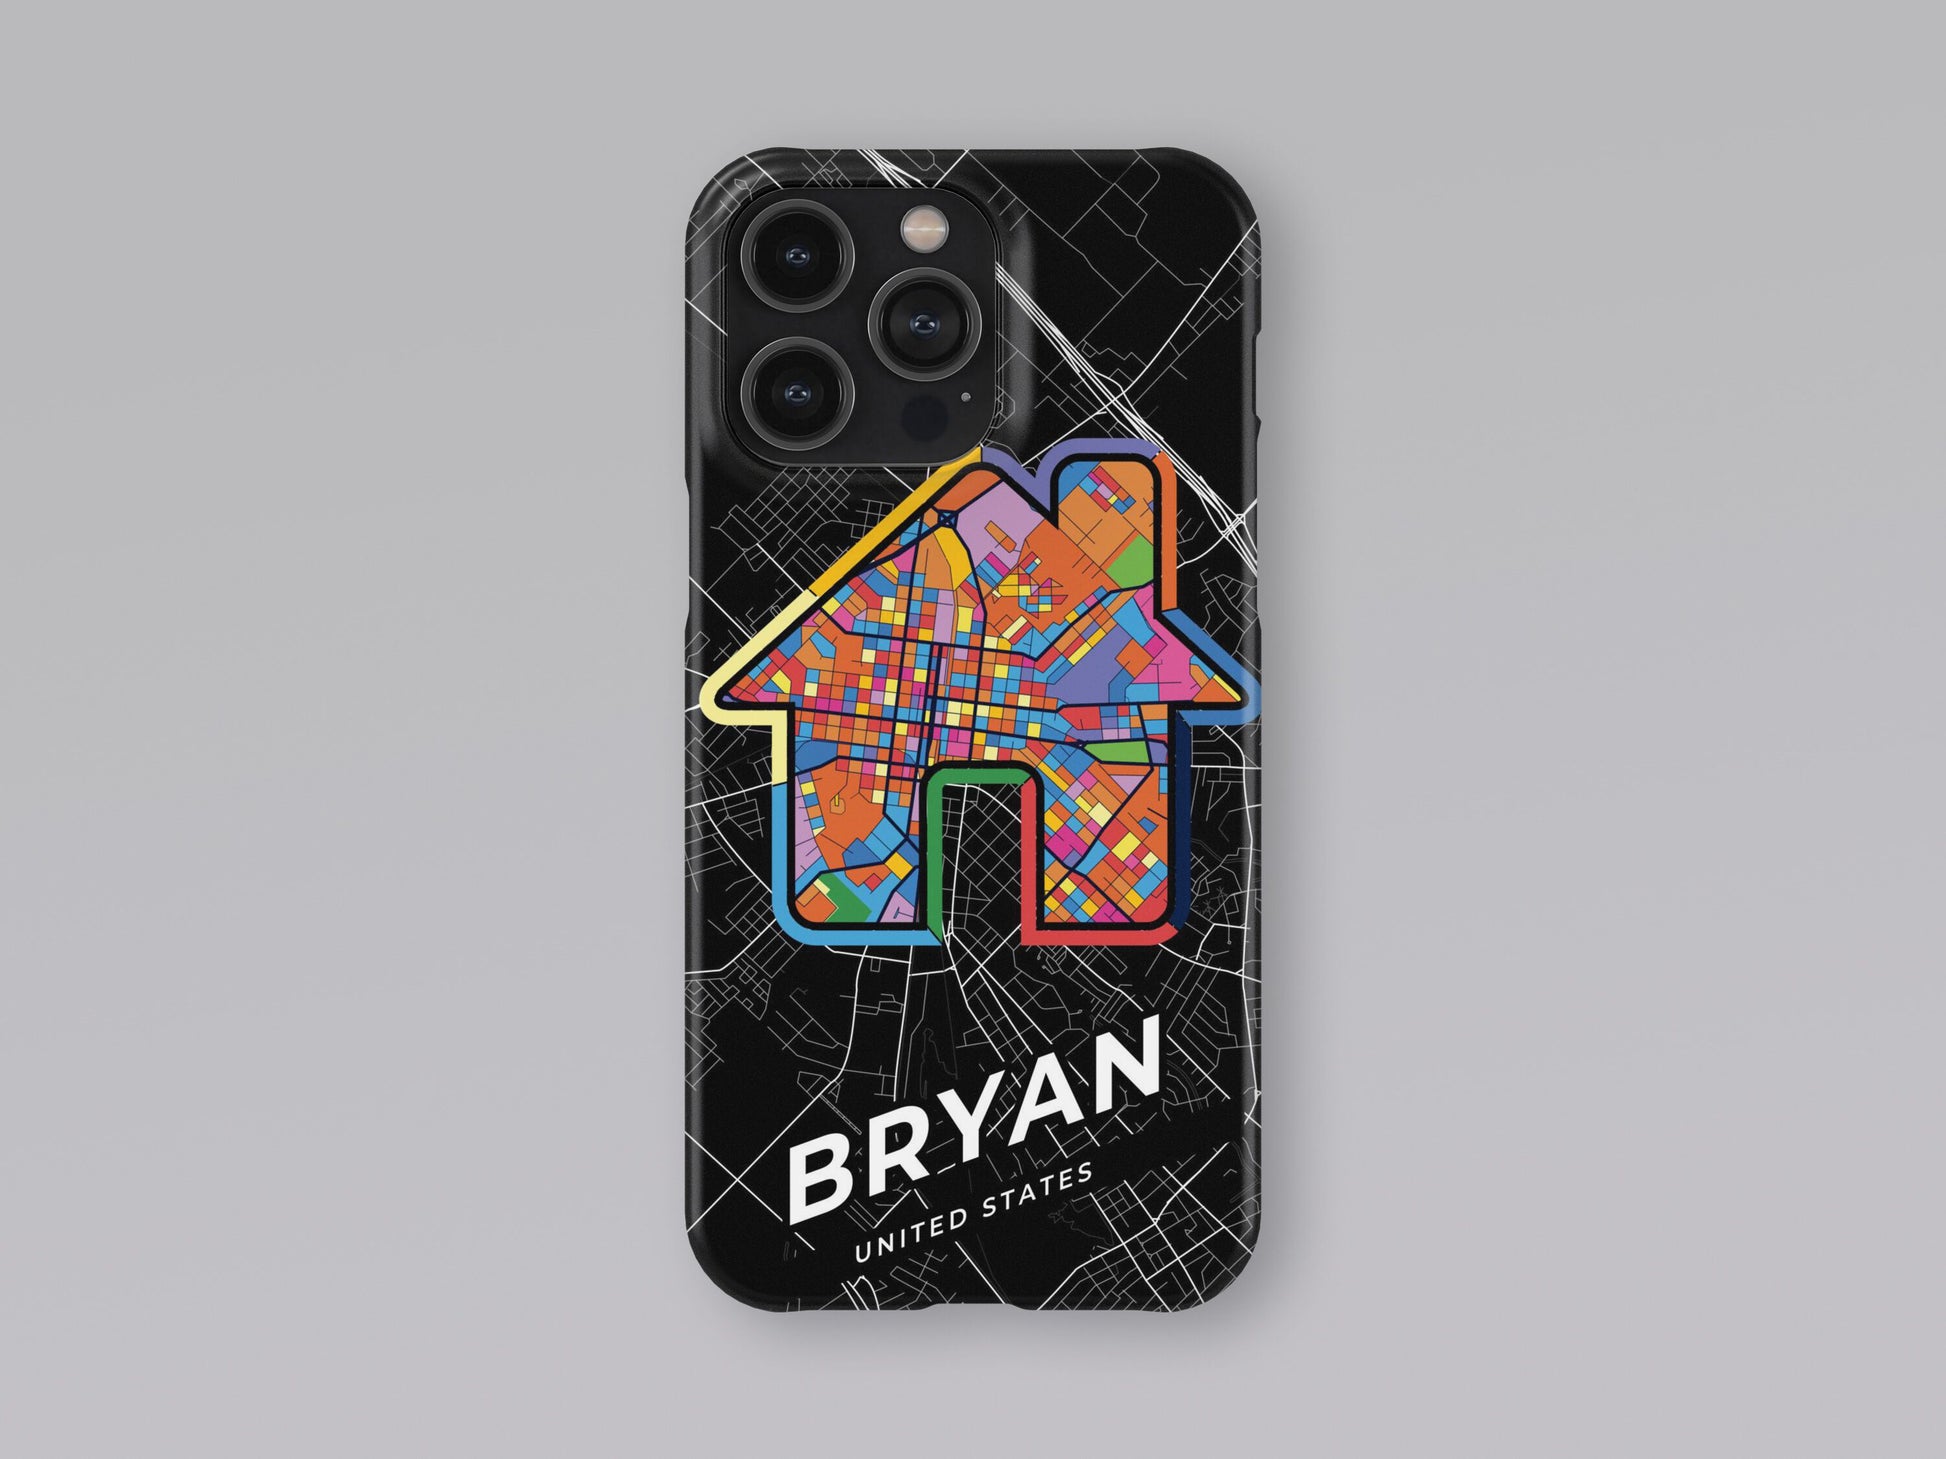 Bryan Texas slim phone case with colorful icon. Birthday, wedding or housewarming gift. Couple match cases. 3